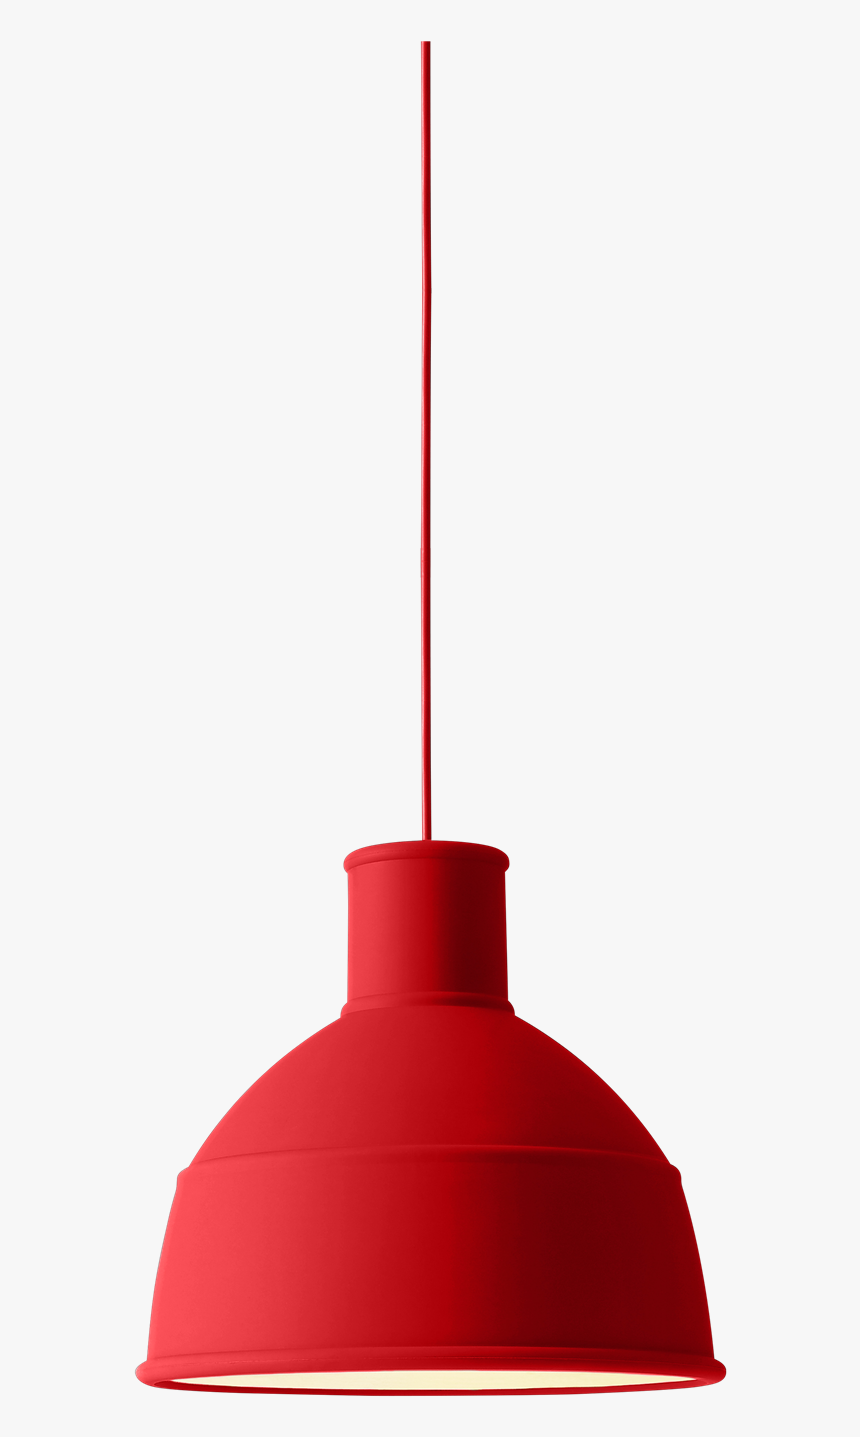 09009 Unfold Dusty Red 1502199862 - Muuto Unfold Red, HD Png Download, Free Download